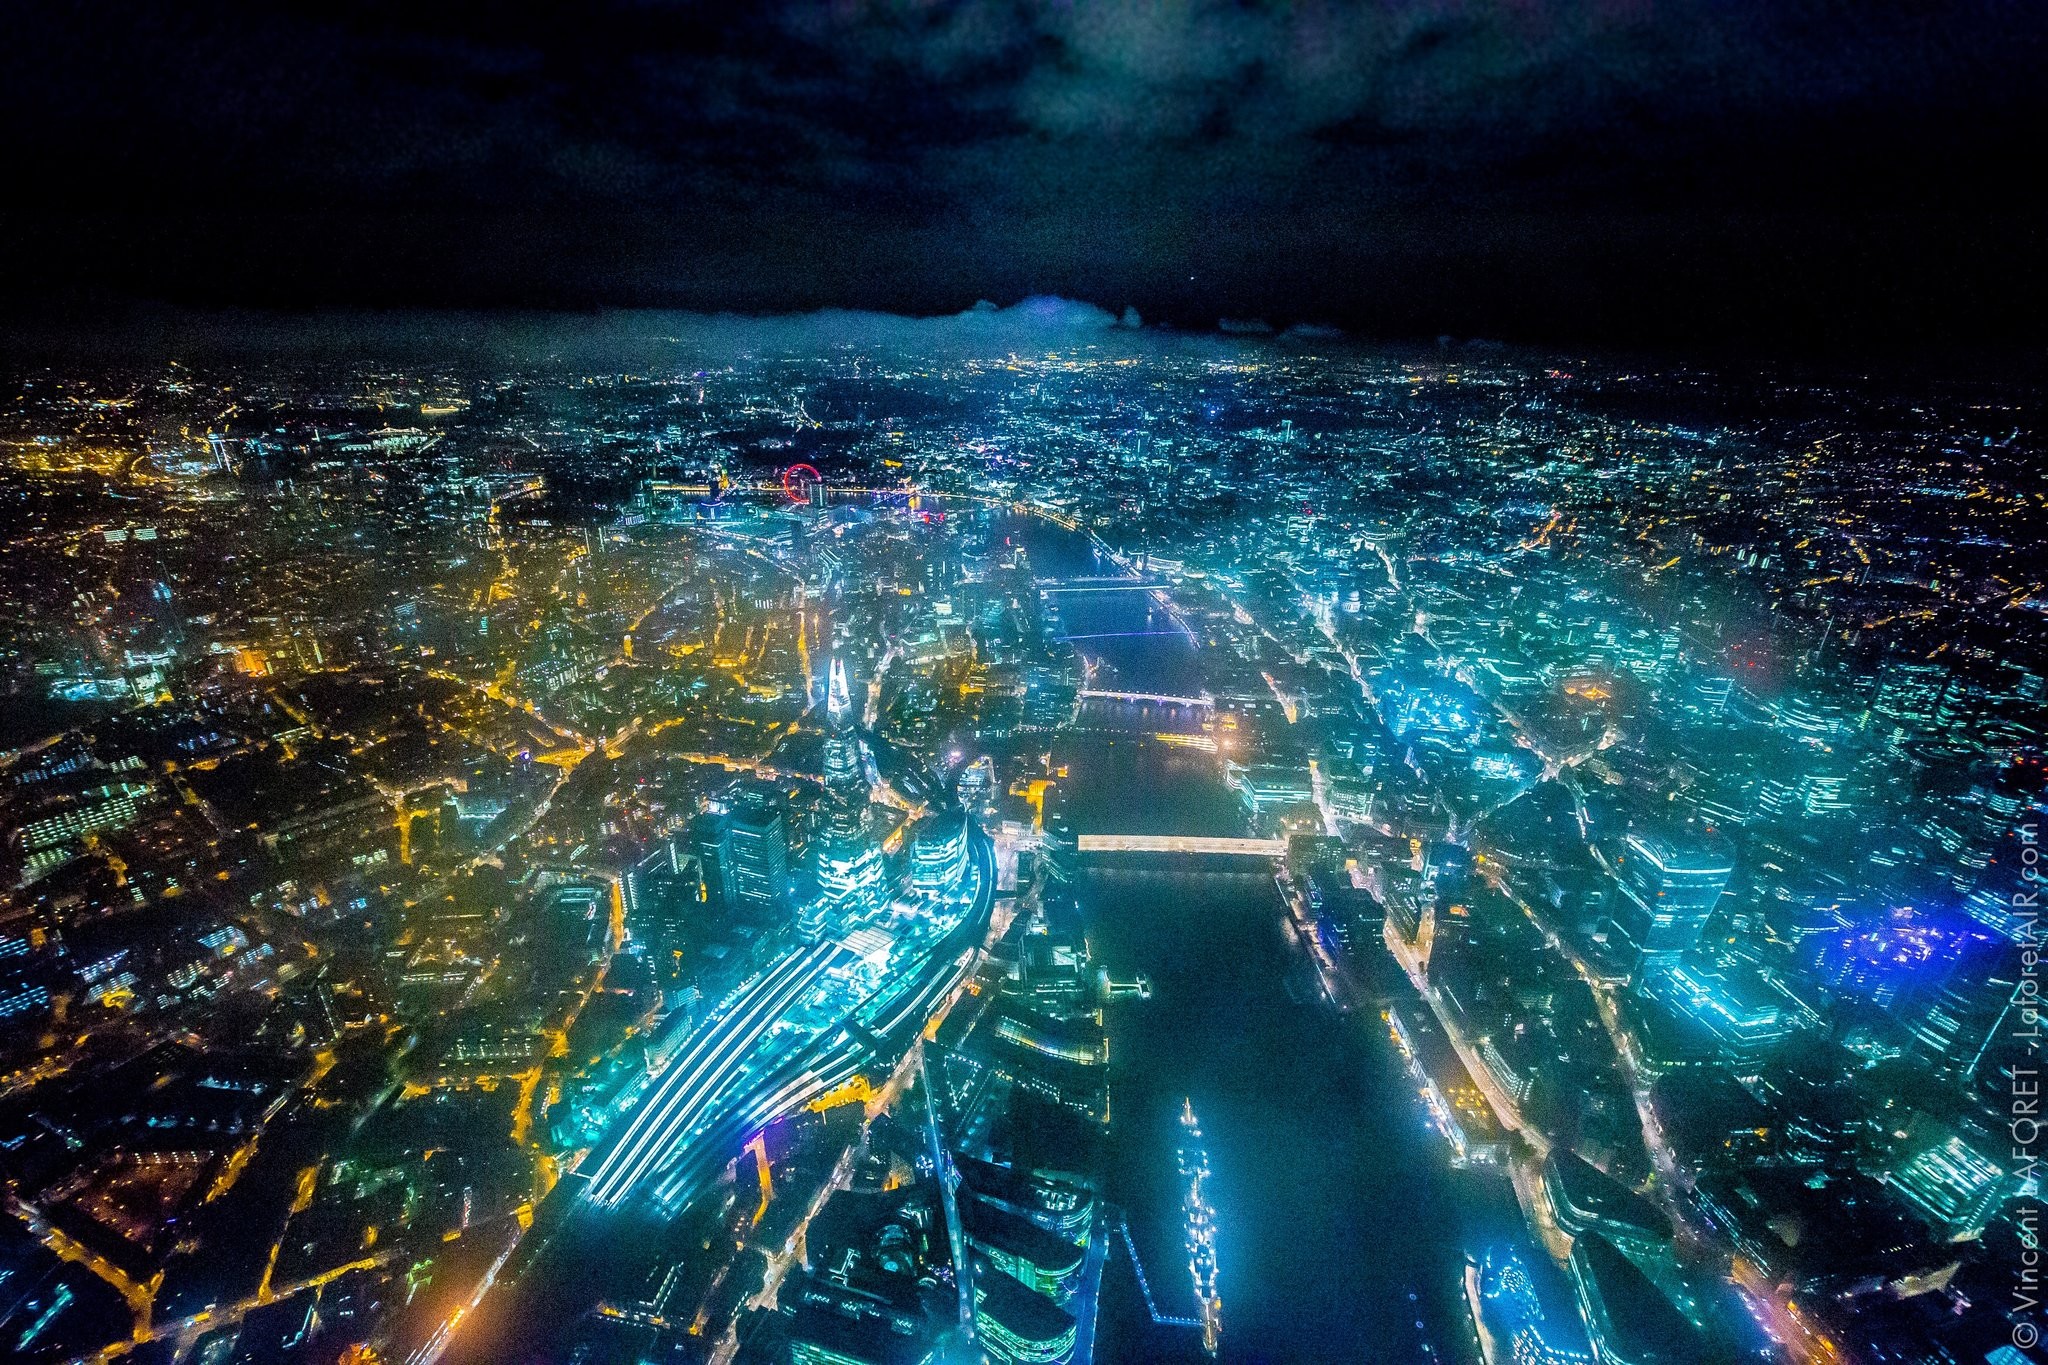 General 2048x1365 Vincent Laforet London cityscape cyan city city lights aerial view night noise UK England